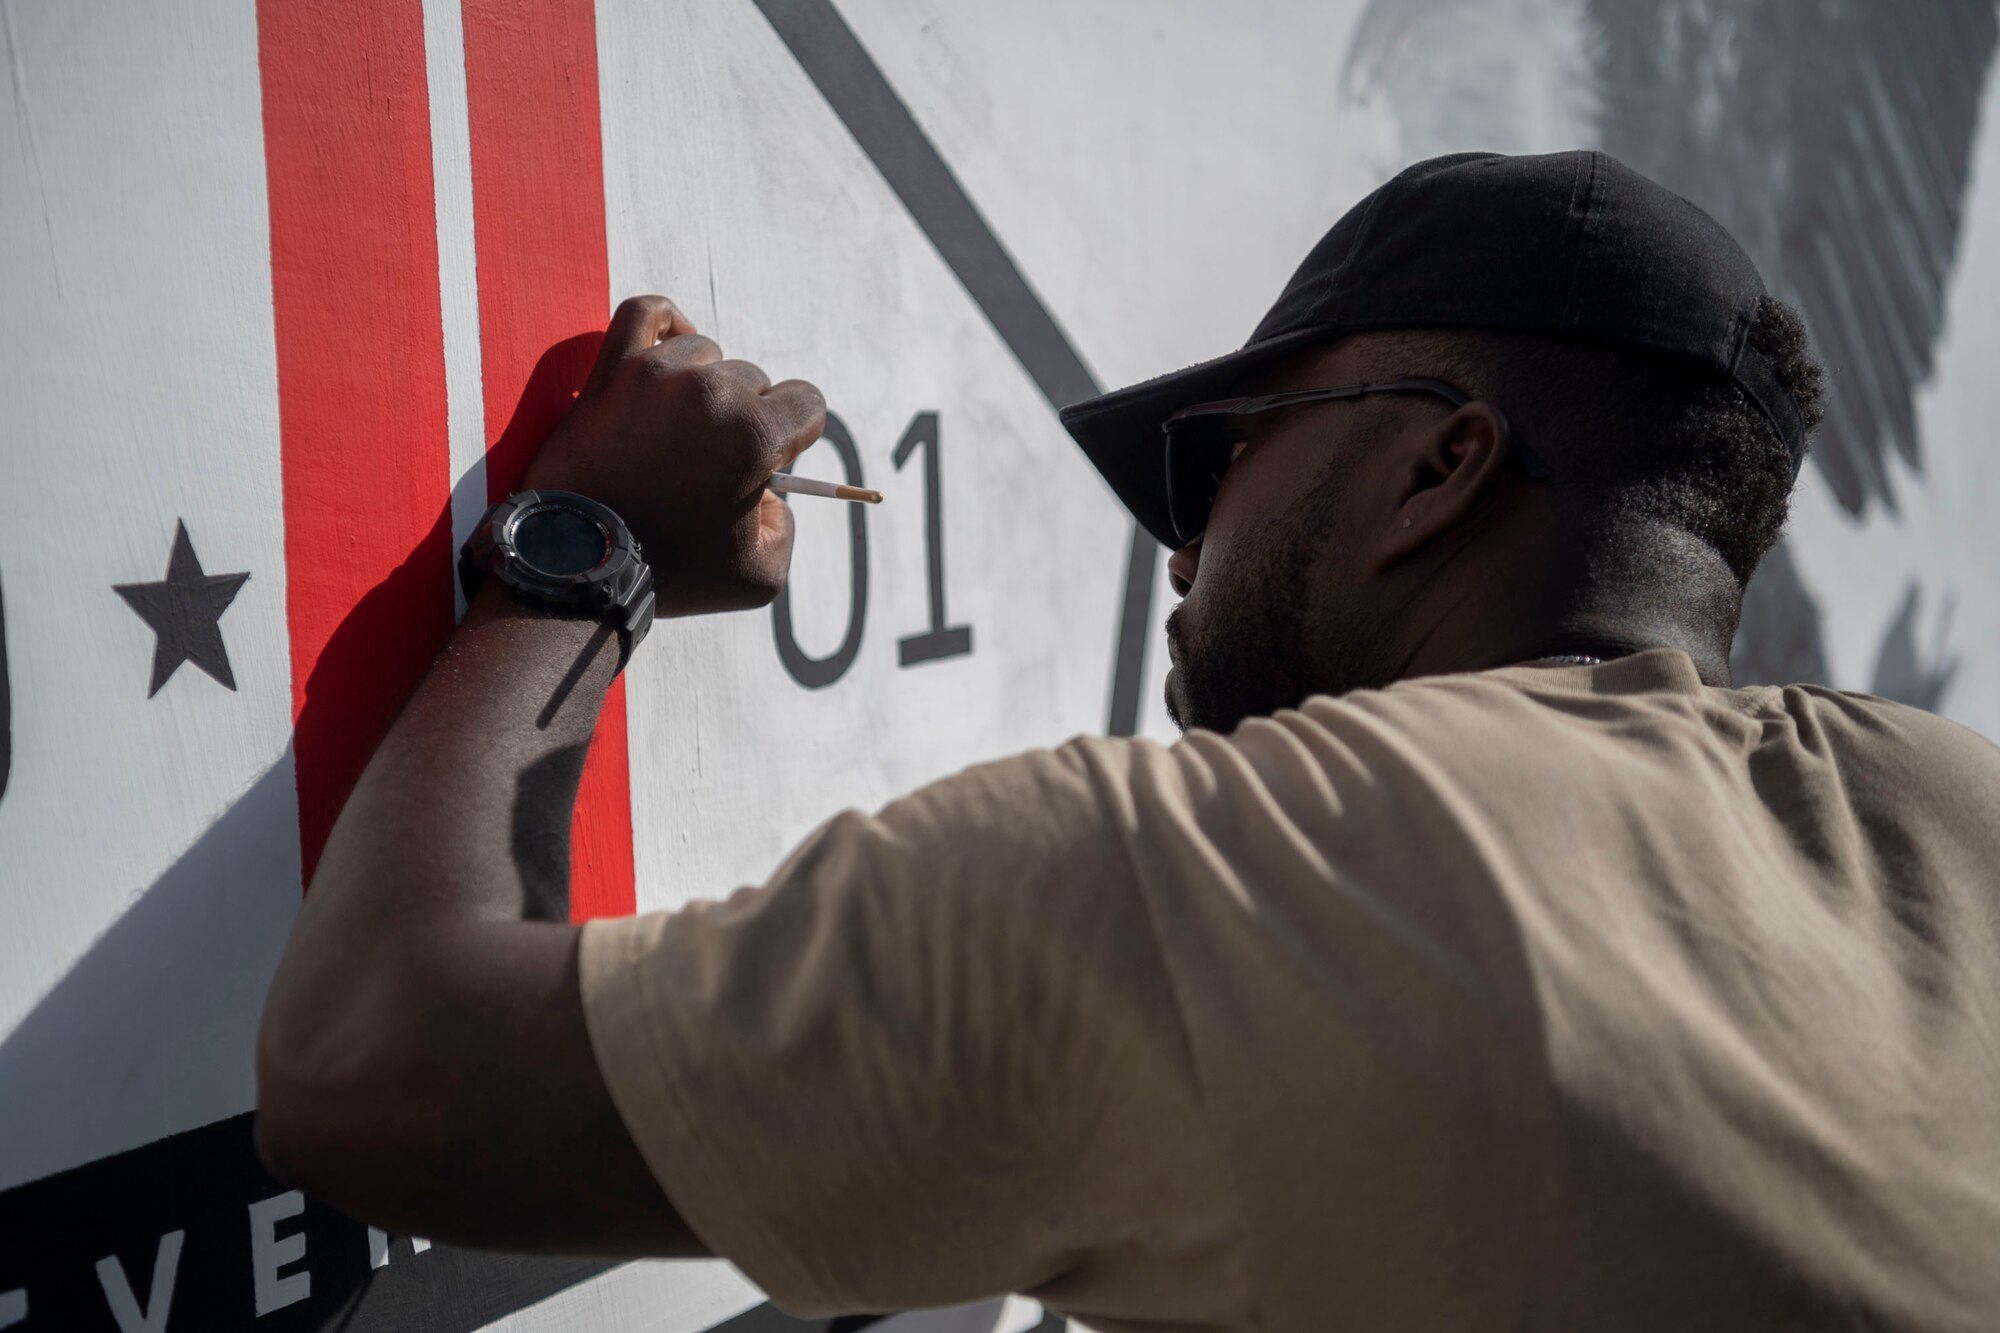 The 332d Air Expeditionary Wing honors those lives lost during the September 11 terrorist attacks in 2001. The 332d AEW held a 24 hour stair climb, the “Run to Remember” 5k, an unveiling of a 9/11 themed T-wall, Emergency Services interactive display, a flyover, cookout, 9/11 themed movie night and a memorial ceremony that showed a screening of a documentary  showcasing the sequence of events during the attacks. (U.S. Air Force photo by Tech. Sgt. Jeffery Foster)